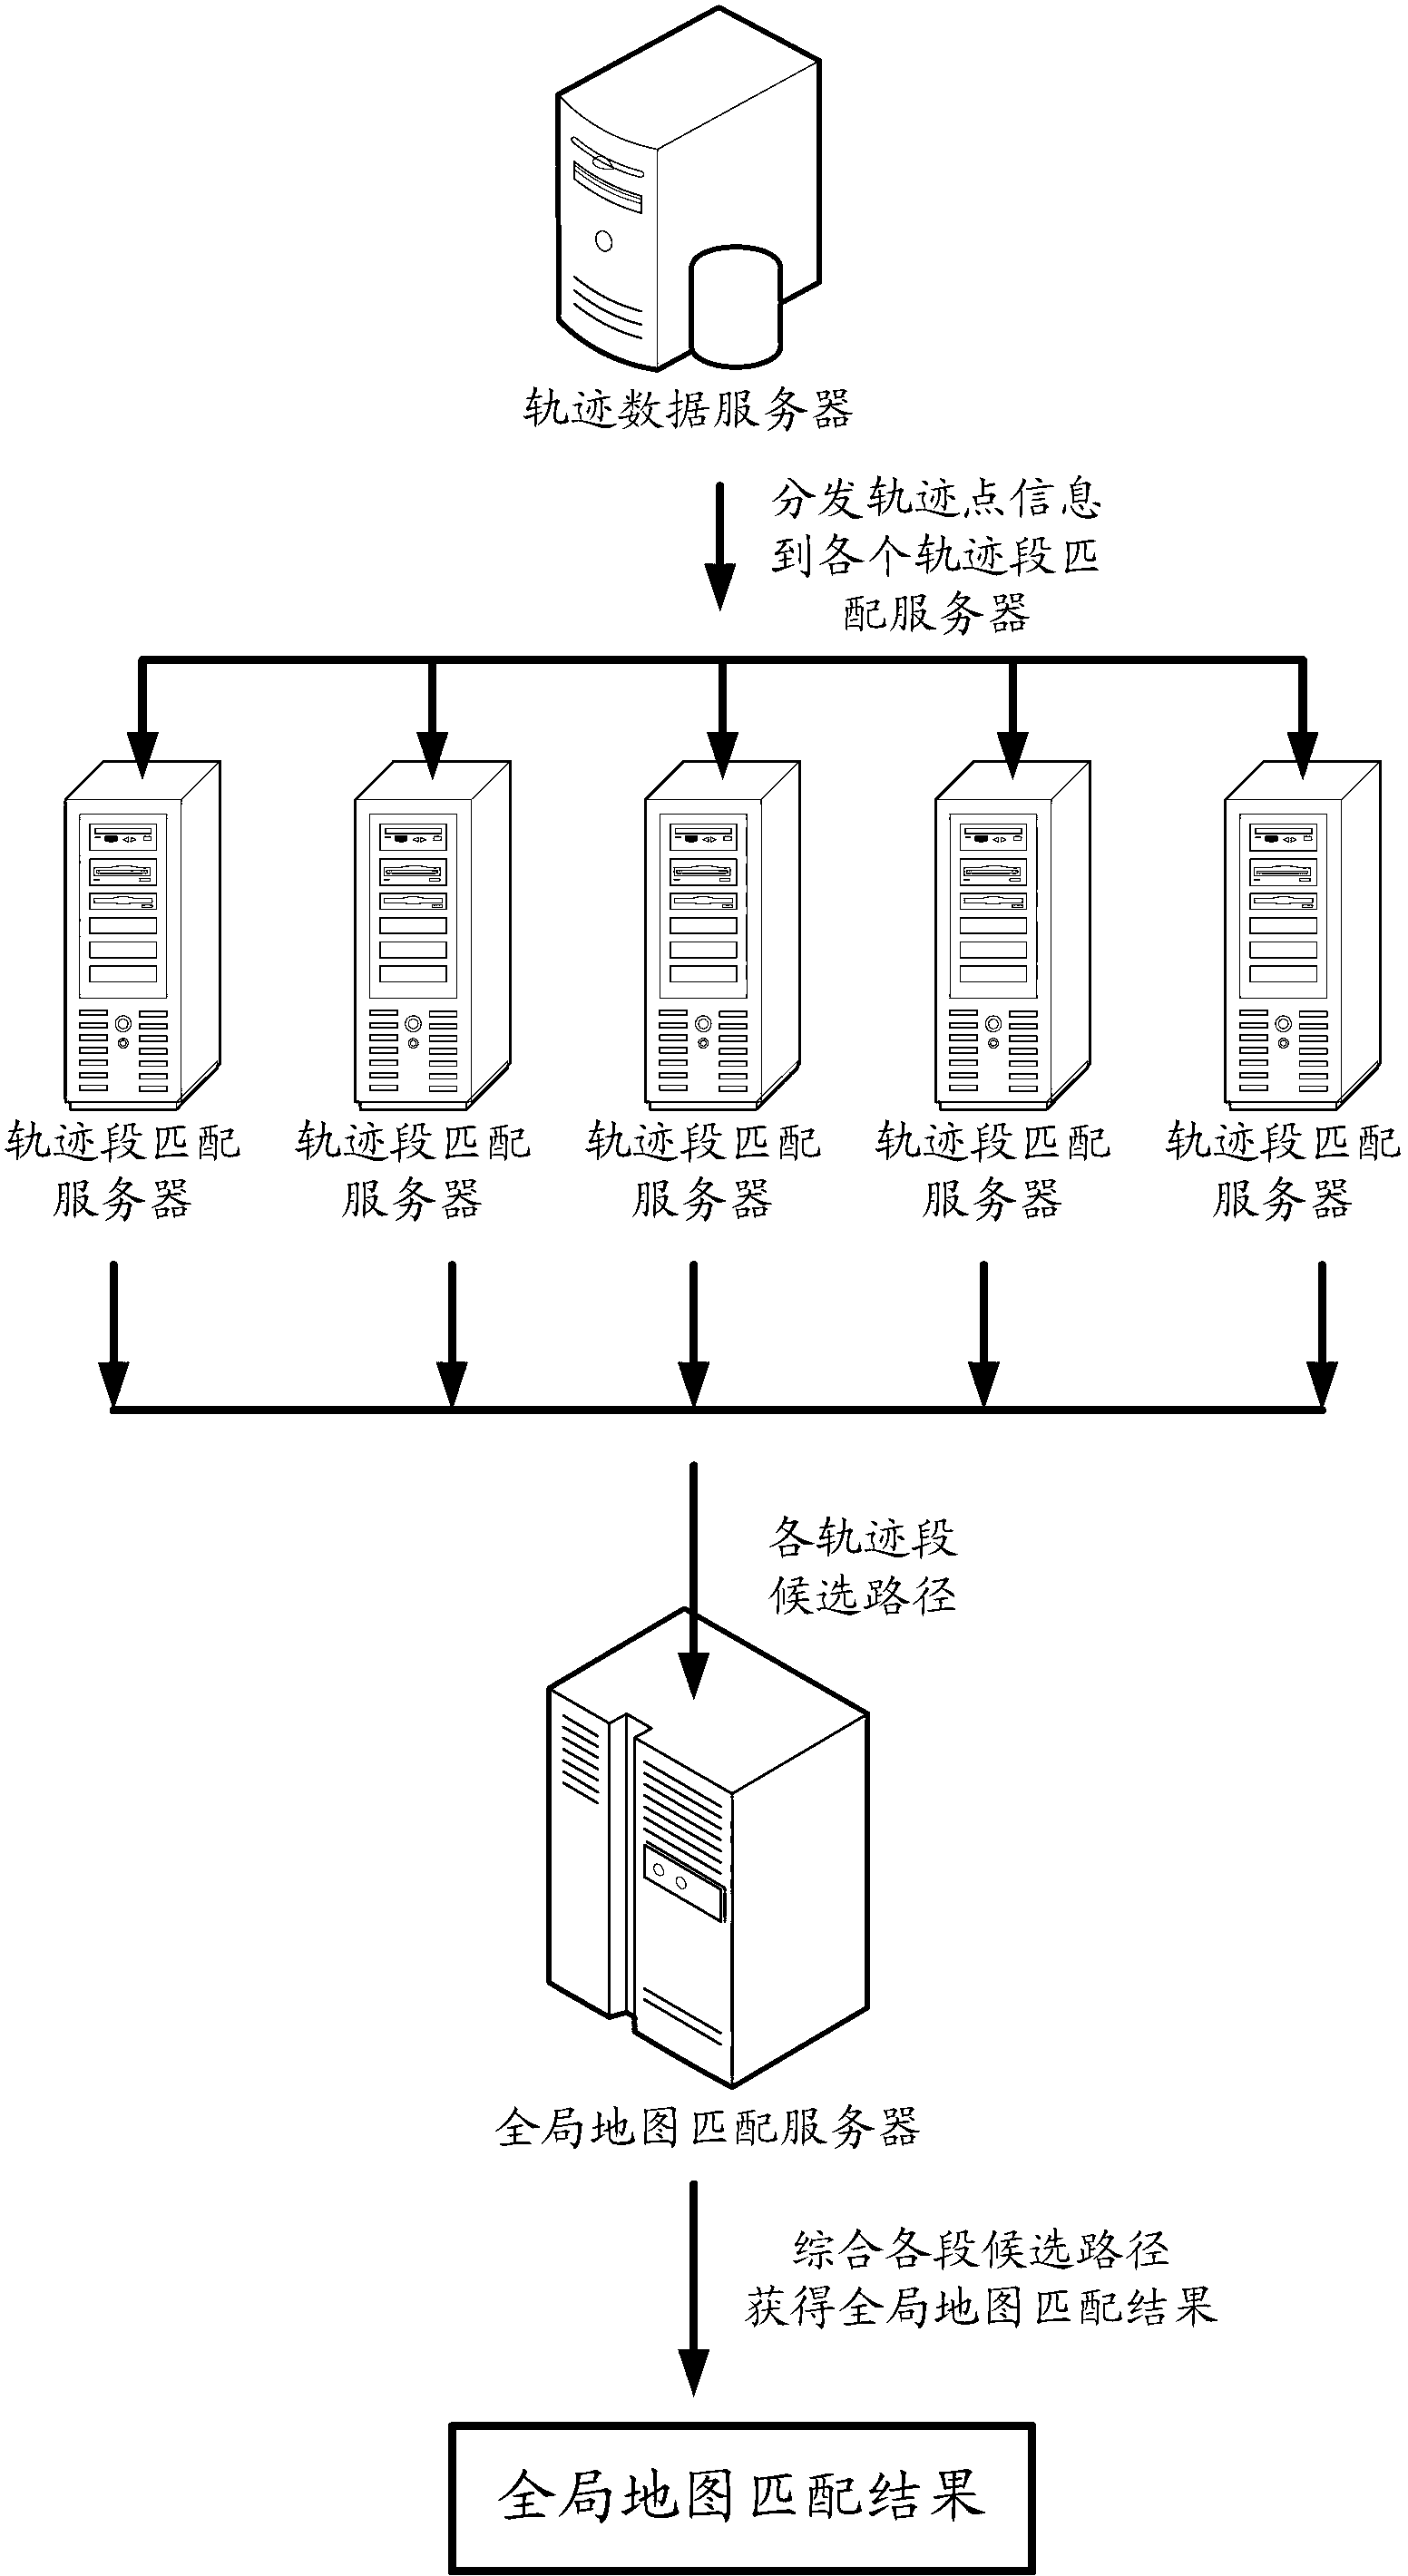 Method and device for matching maps of floating car data